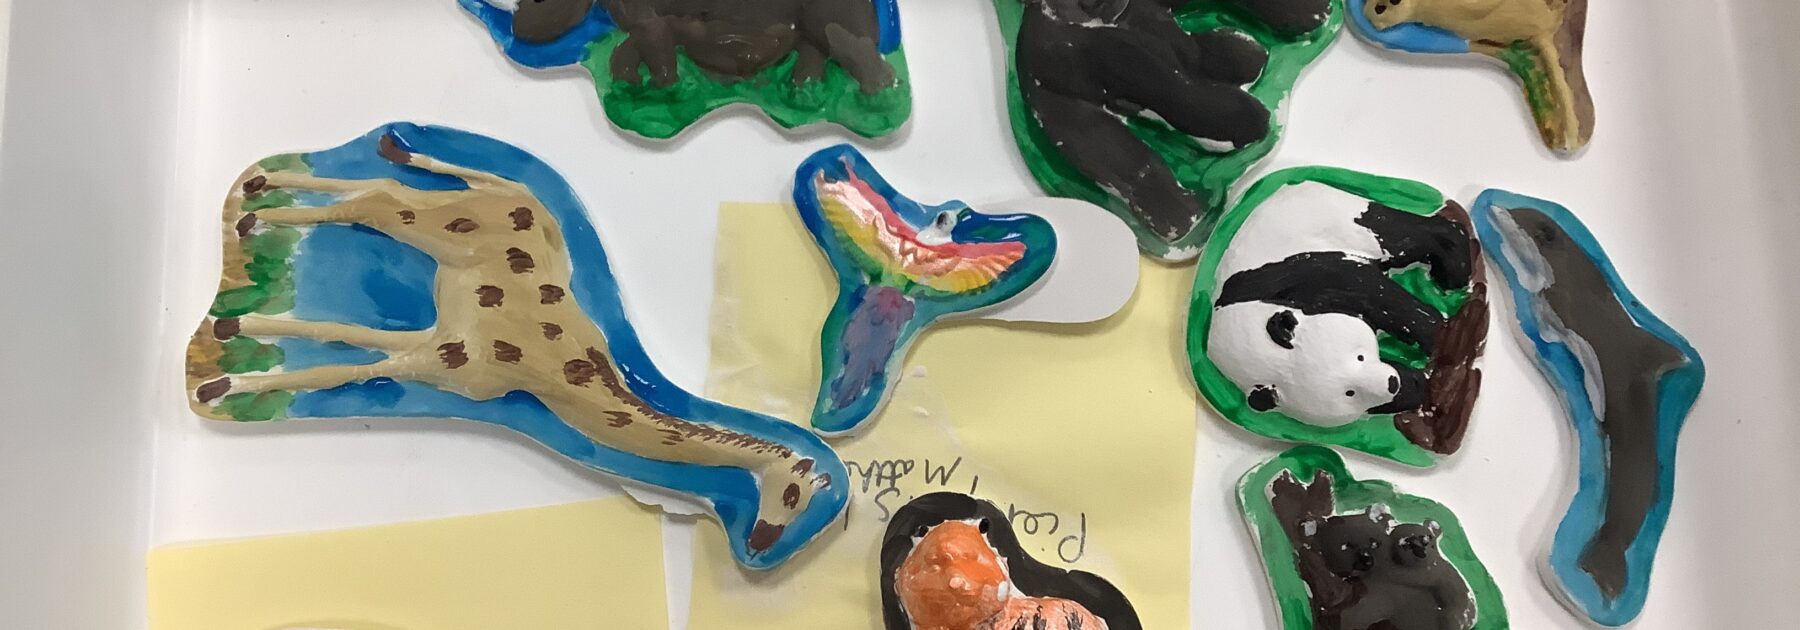 Models Complete in Blue Planet and Natural World Club